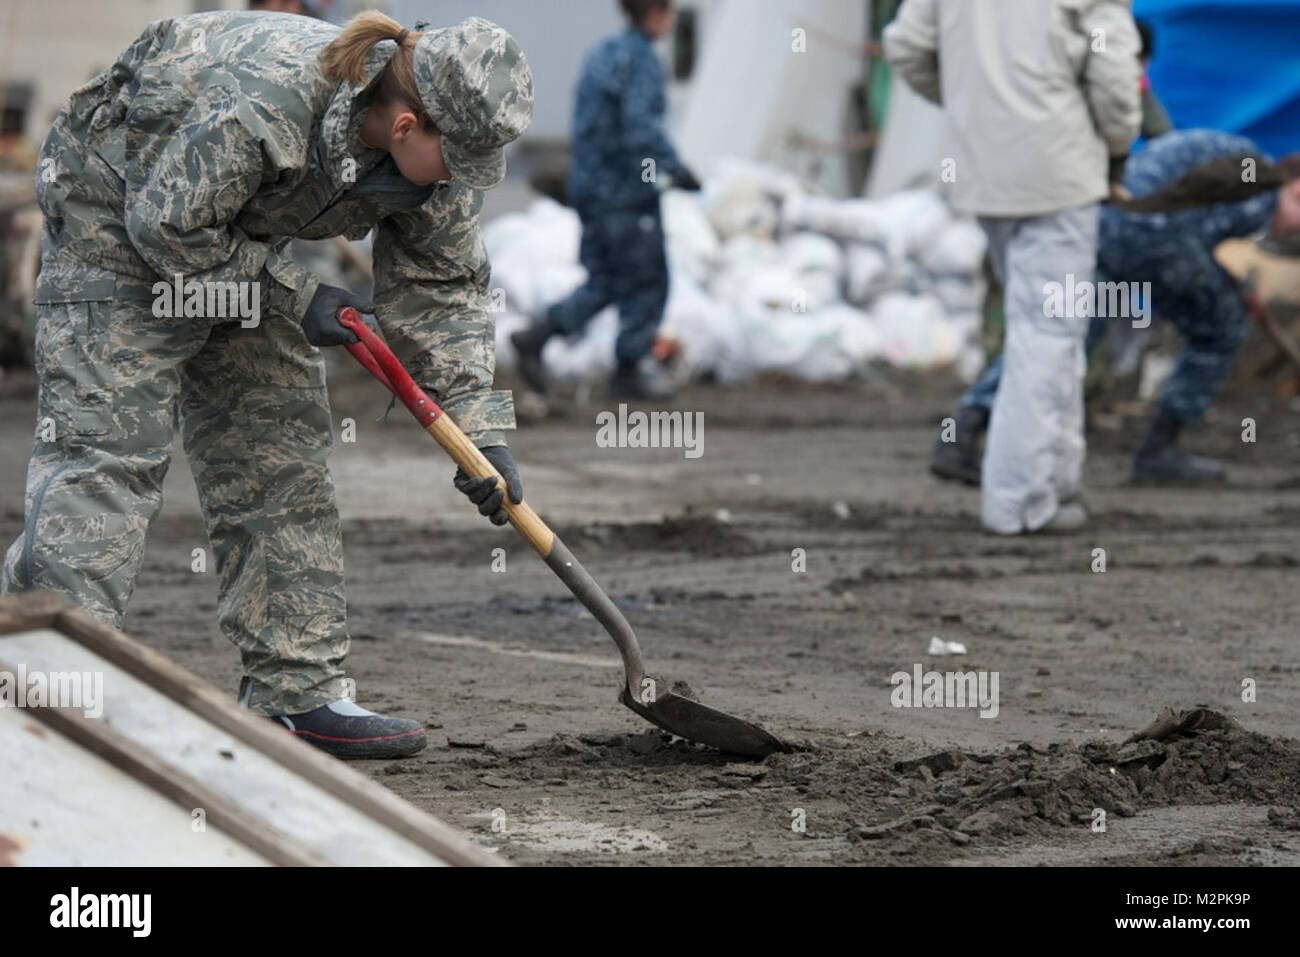 110321-N-9436A-228 HACHINOHE, Japan (March 21, 2011) 2nd Lt. Christina Heino from Hydepark, N.Y., assigned to the 301st Intelligence Squadron, shovels sediment out of the street during relief efforts in this tsunami-battered city. More than 130 volunteers from Misawa Air Base and members of the French Army and Fire Department assisted in a cleanup effort in the northern Japanese city that was devastated by a 9.0-magnitude earthquake that triggered a devastating tsunami on Japan's eastern coastline. (U.S. Navy photo by Cryptologic Technician (Collection) 2nd Class Thomas Ahern/Released) 110321- Stock Photo